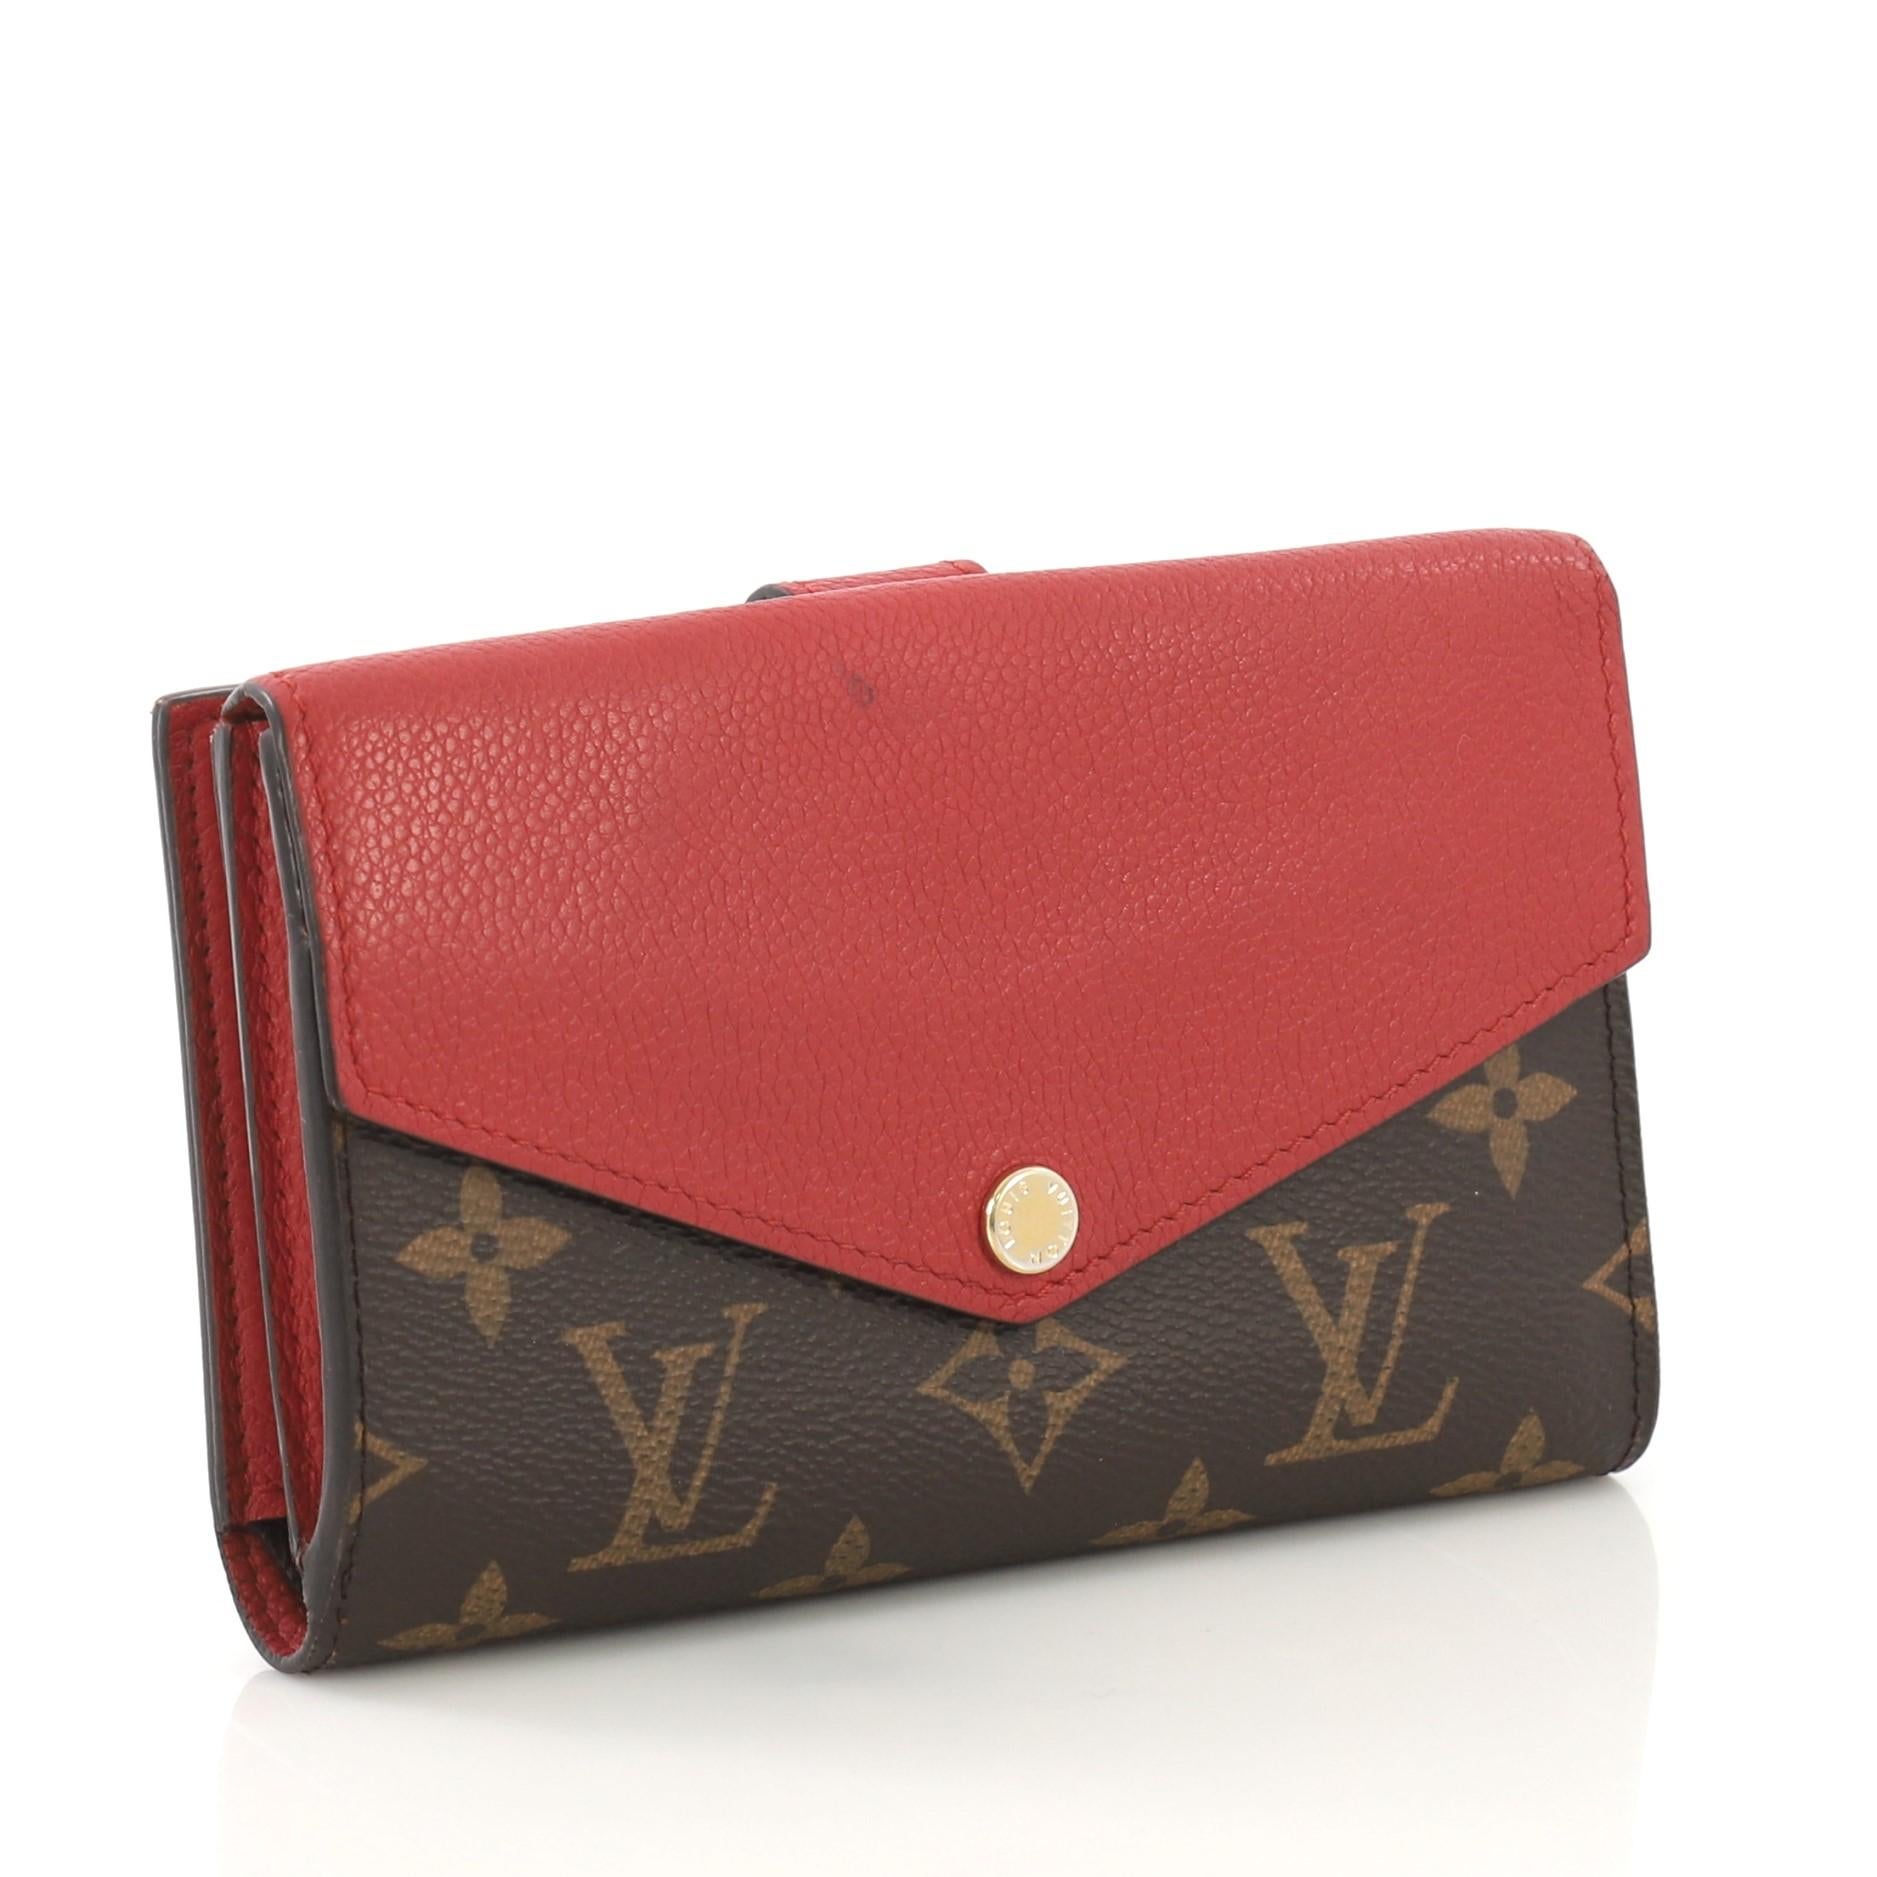 This Louis Vuitton Pallas Compact Wallet Monogram Canvas and Calf Leather, crafted from brown monogram coated canvas and red calf leather, features envelope flap opening, gusseted compartment, and gold-tone hardware. It opens to a red leather